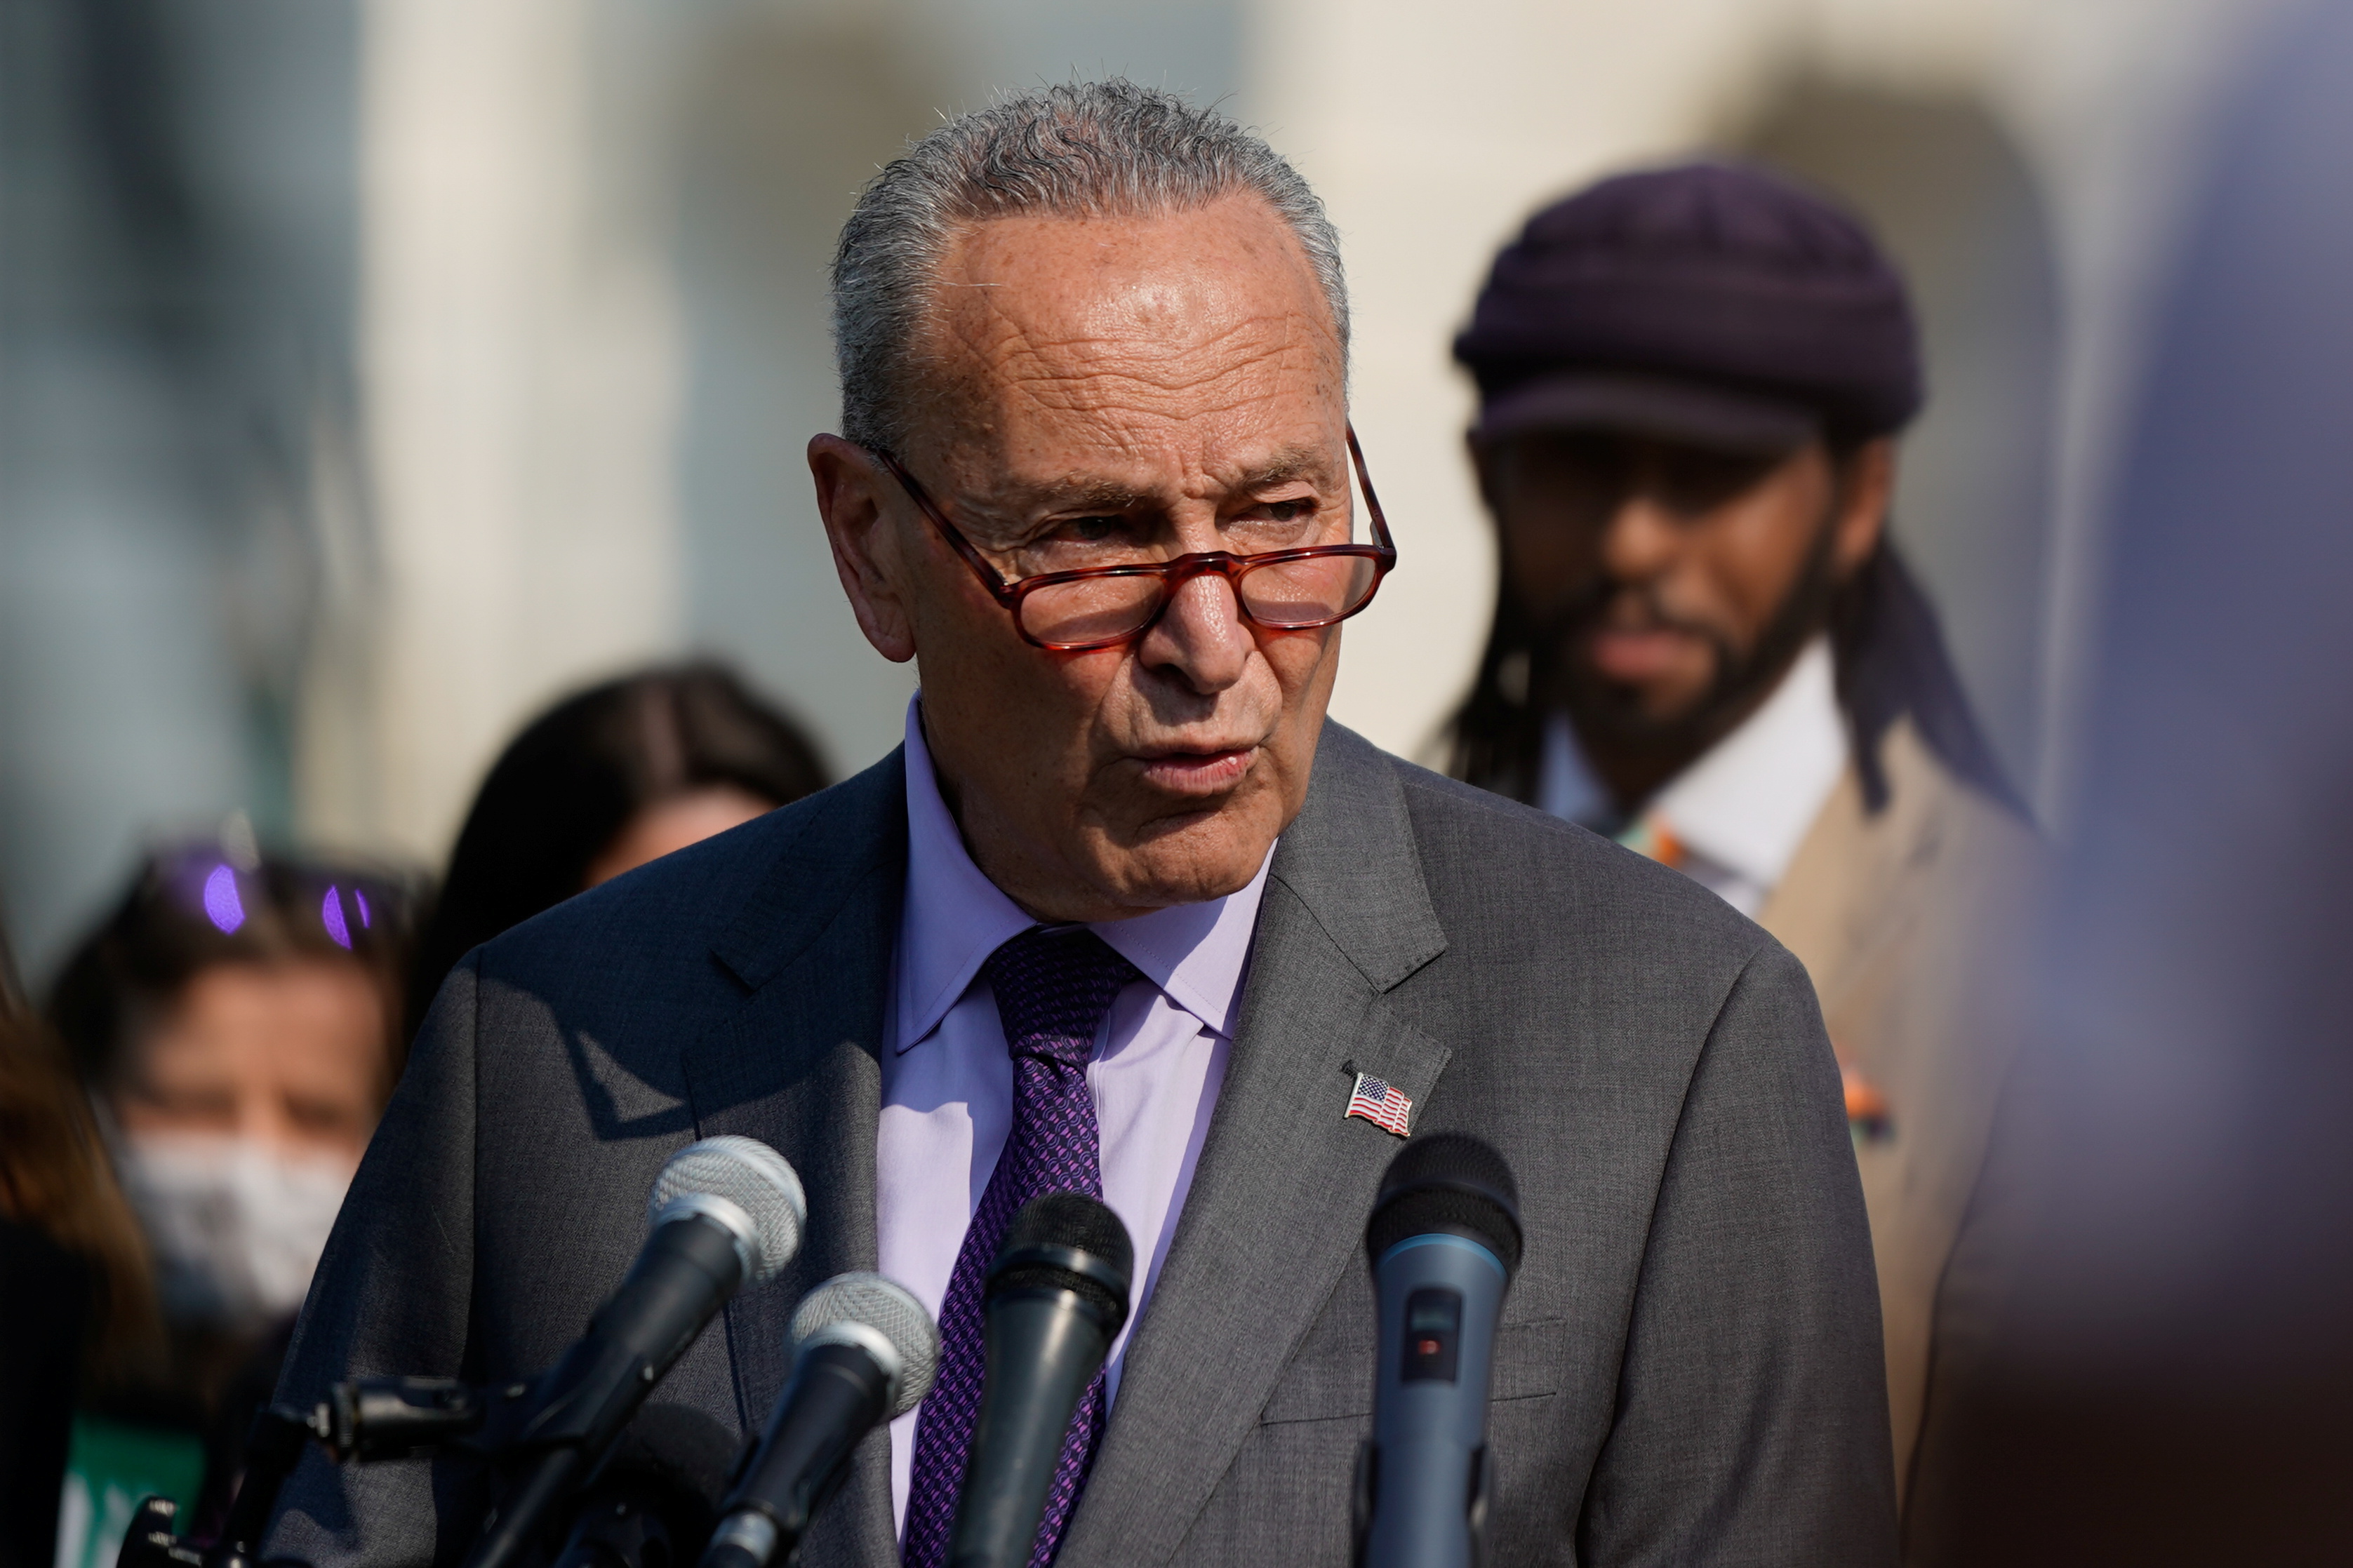 Senate Majority Leader Schumer during news conference urging action on climate change at the U.S. Capitol in Washington